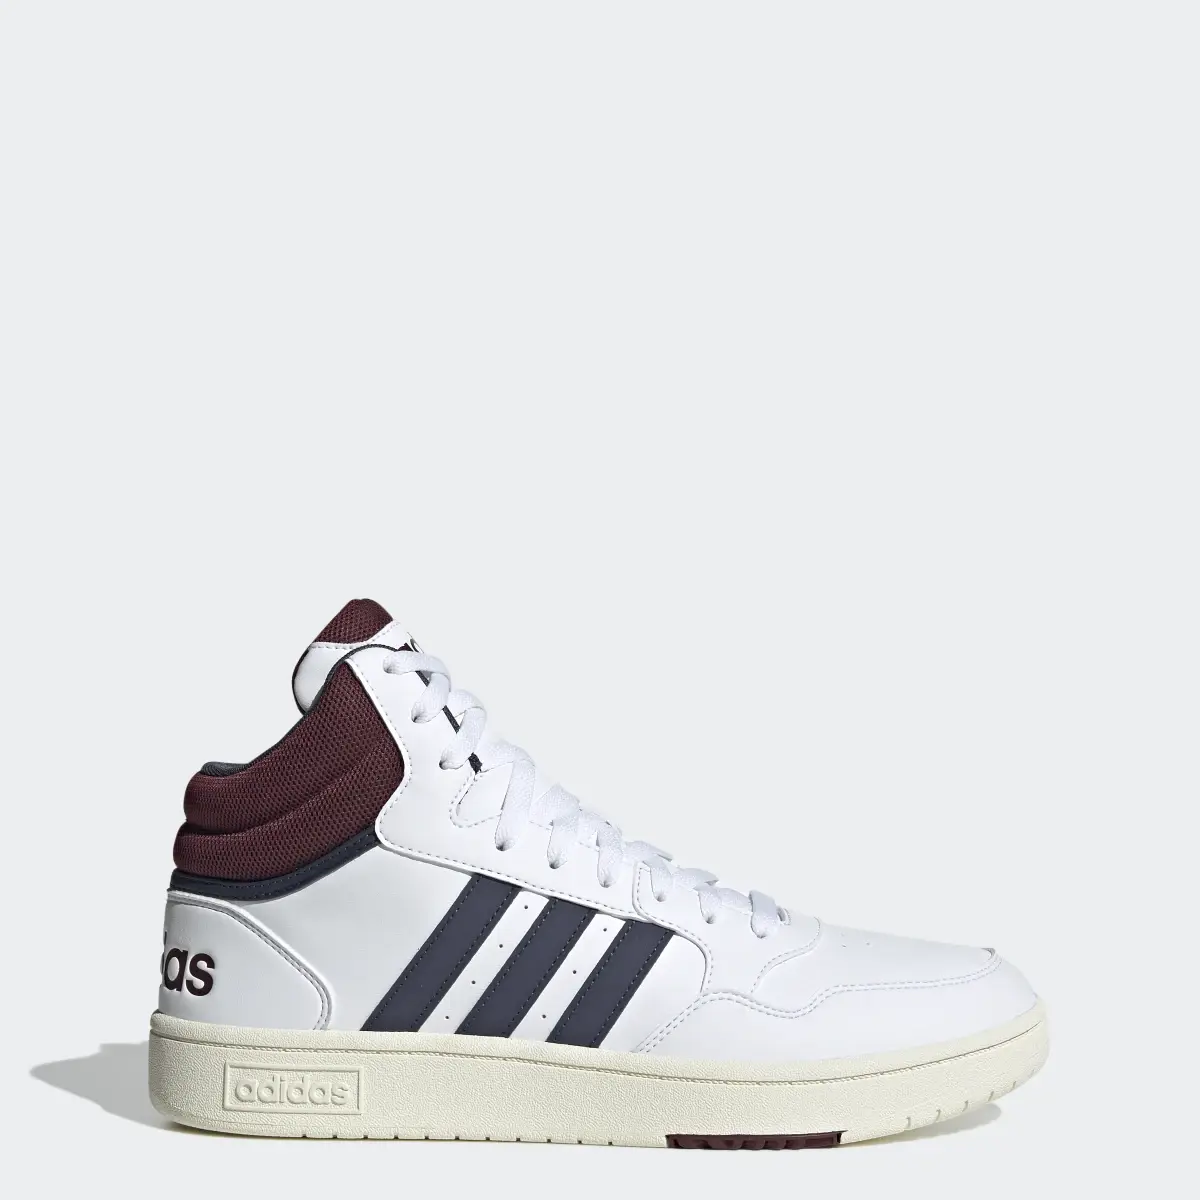 Adidas Hoops 3.0 Mid Lifestyle Basketball Classic Vintage Schuh. 1